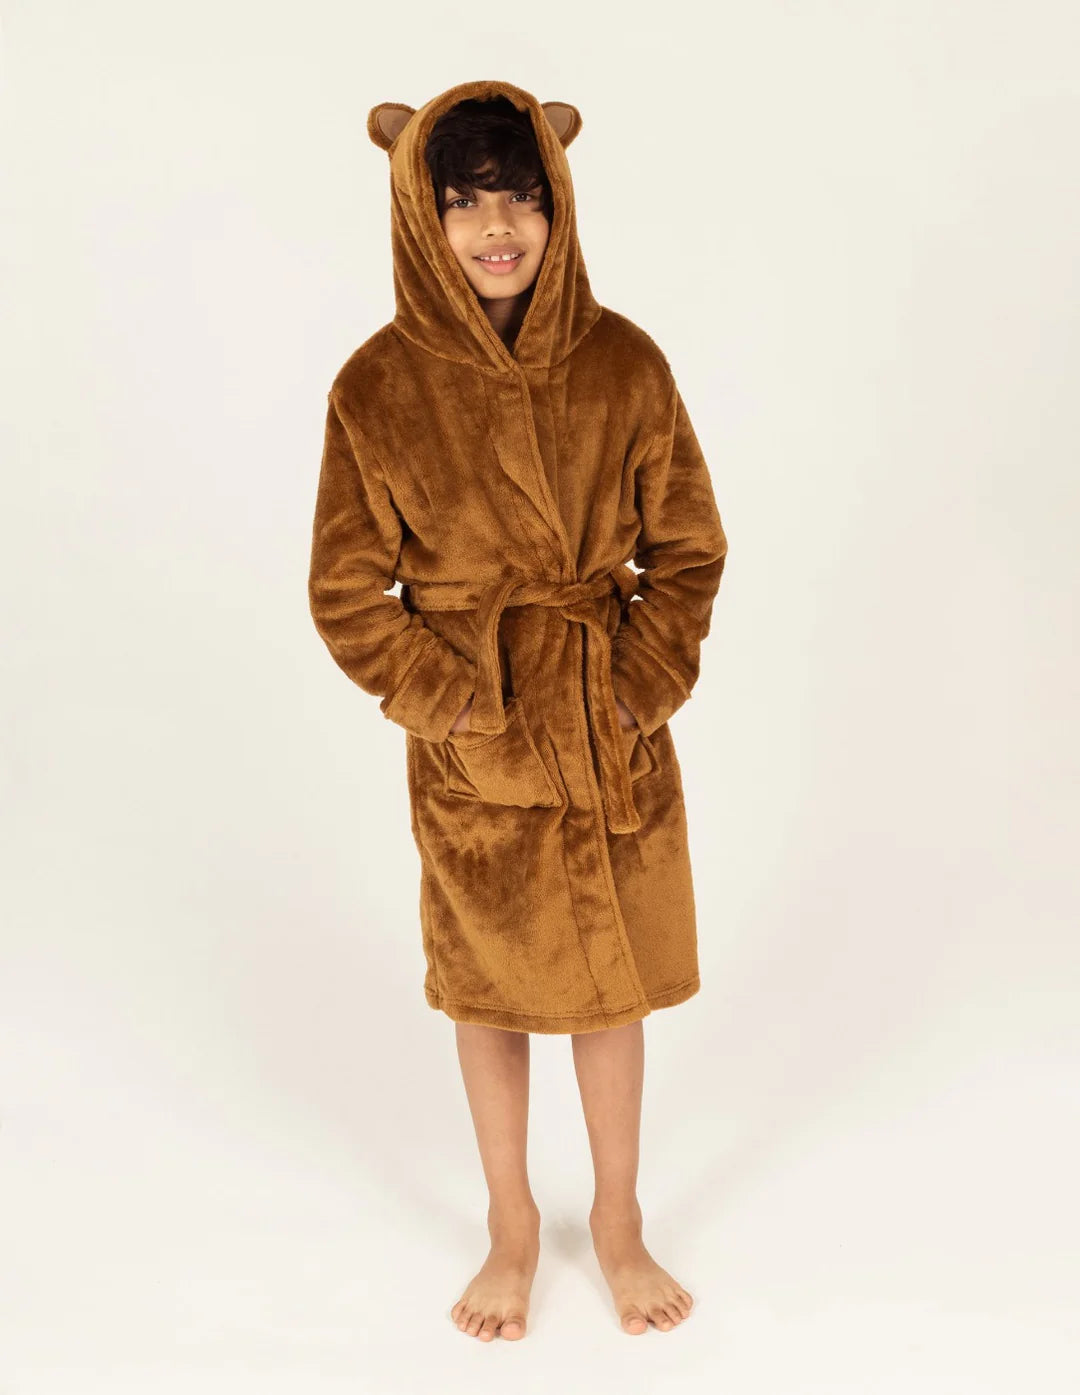 Are You Missing Out? Find Out Why Kid's Robes are so Popular!